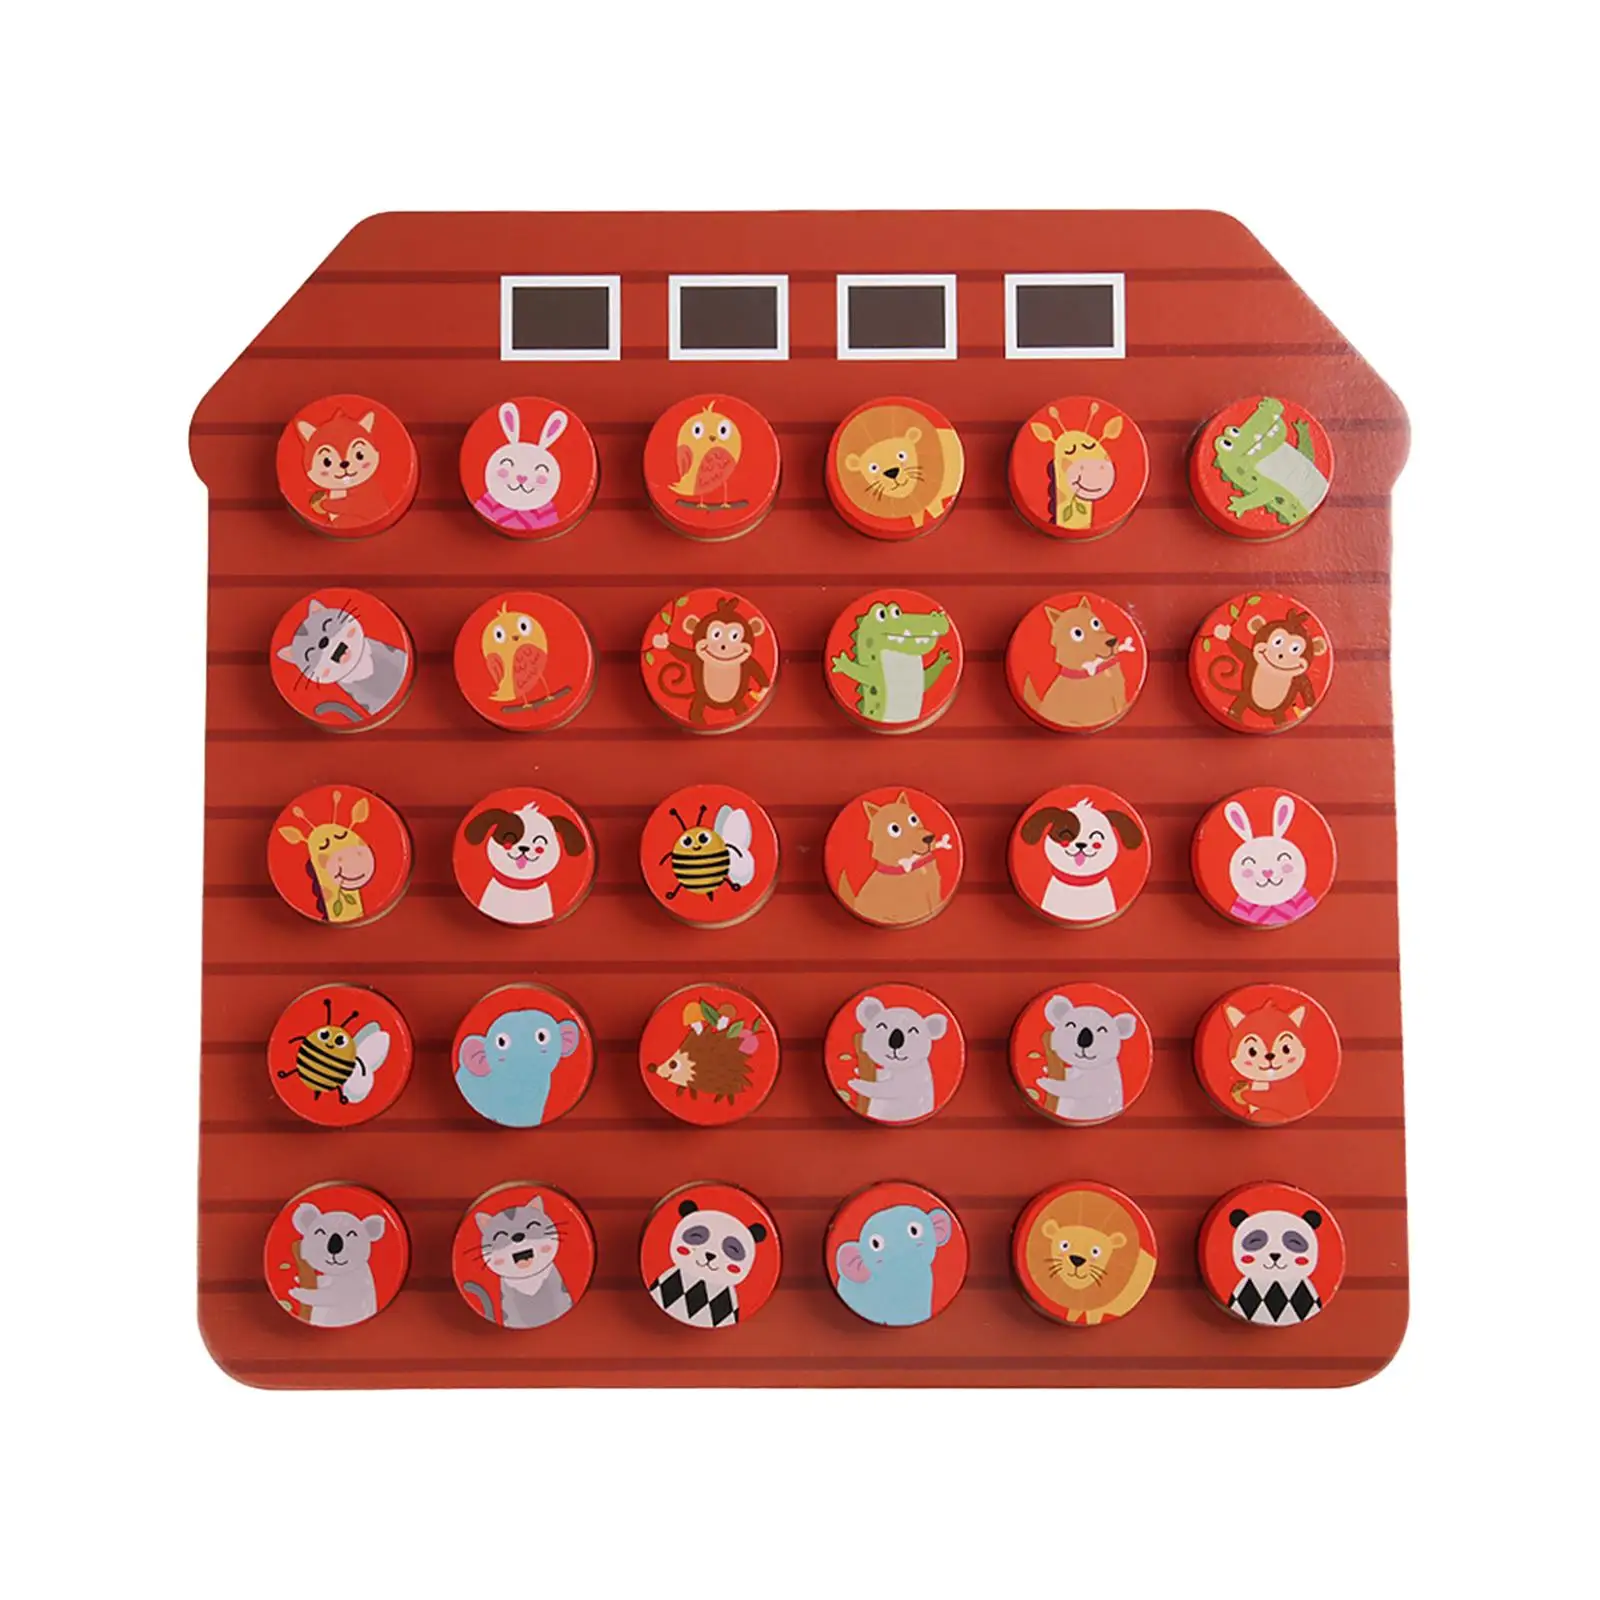 Wooden Chess Board Game Fun Game Toy Developmental Toys Memory Chess Game for Holiday Preschool Kindergarten Parties Leisure